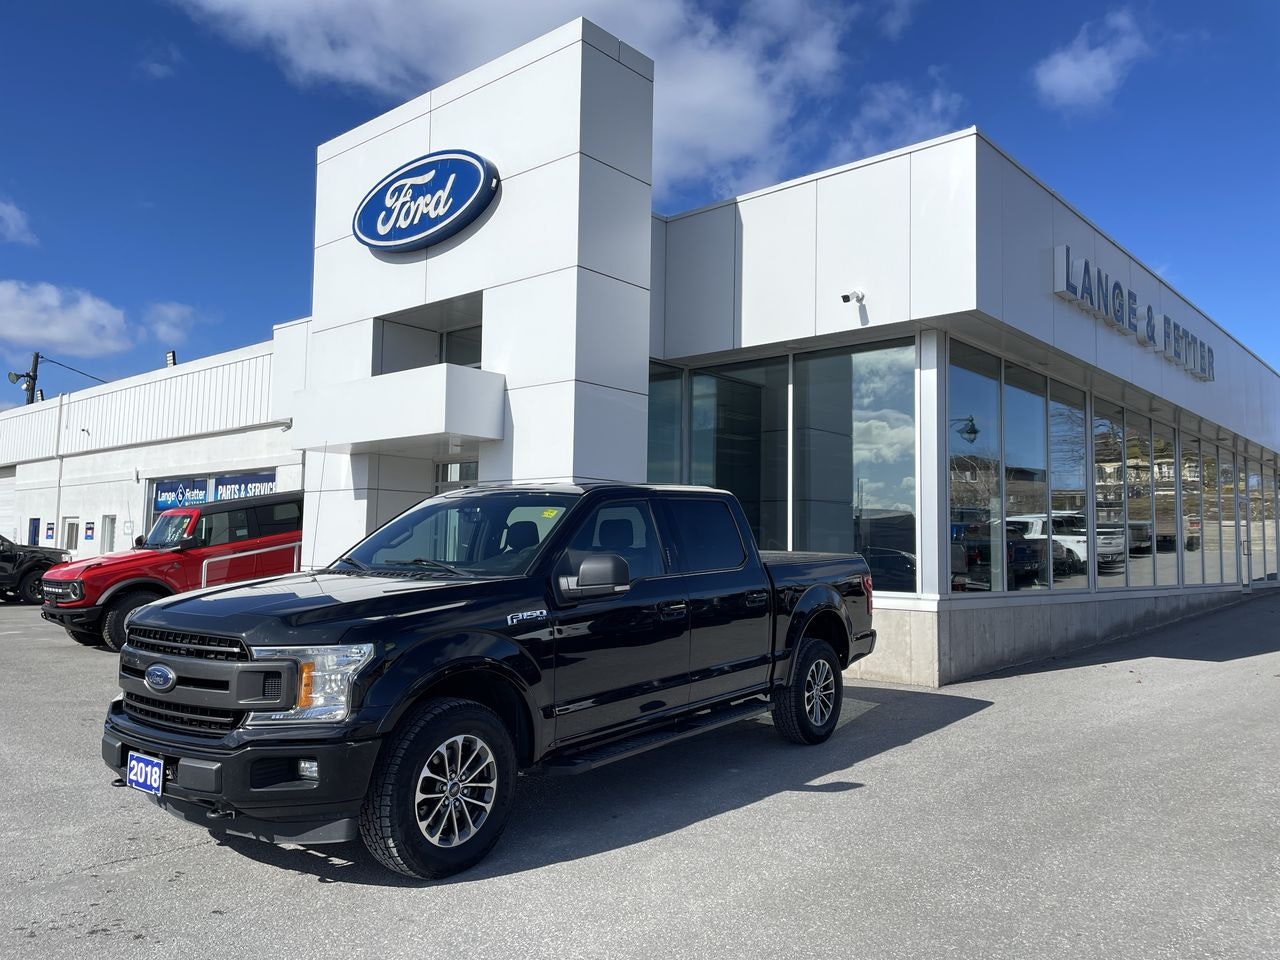 2018 Ford F-150 - 21646A Full Image 1